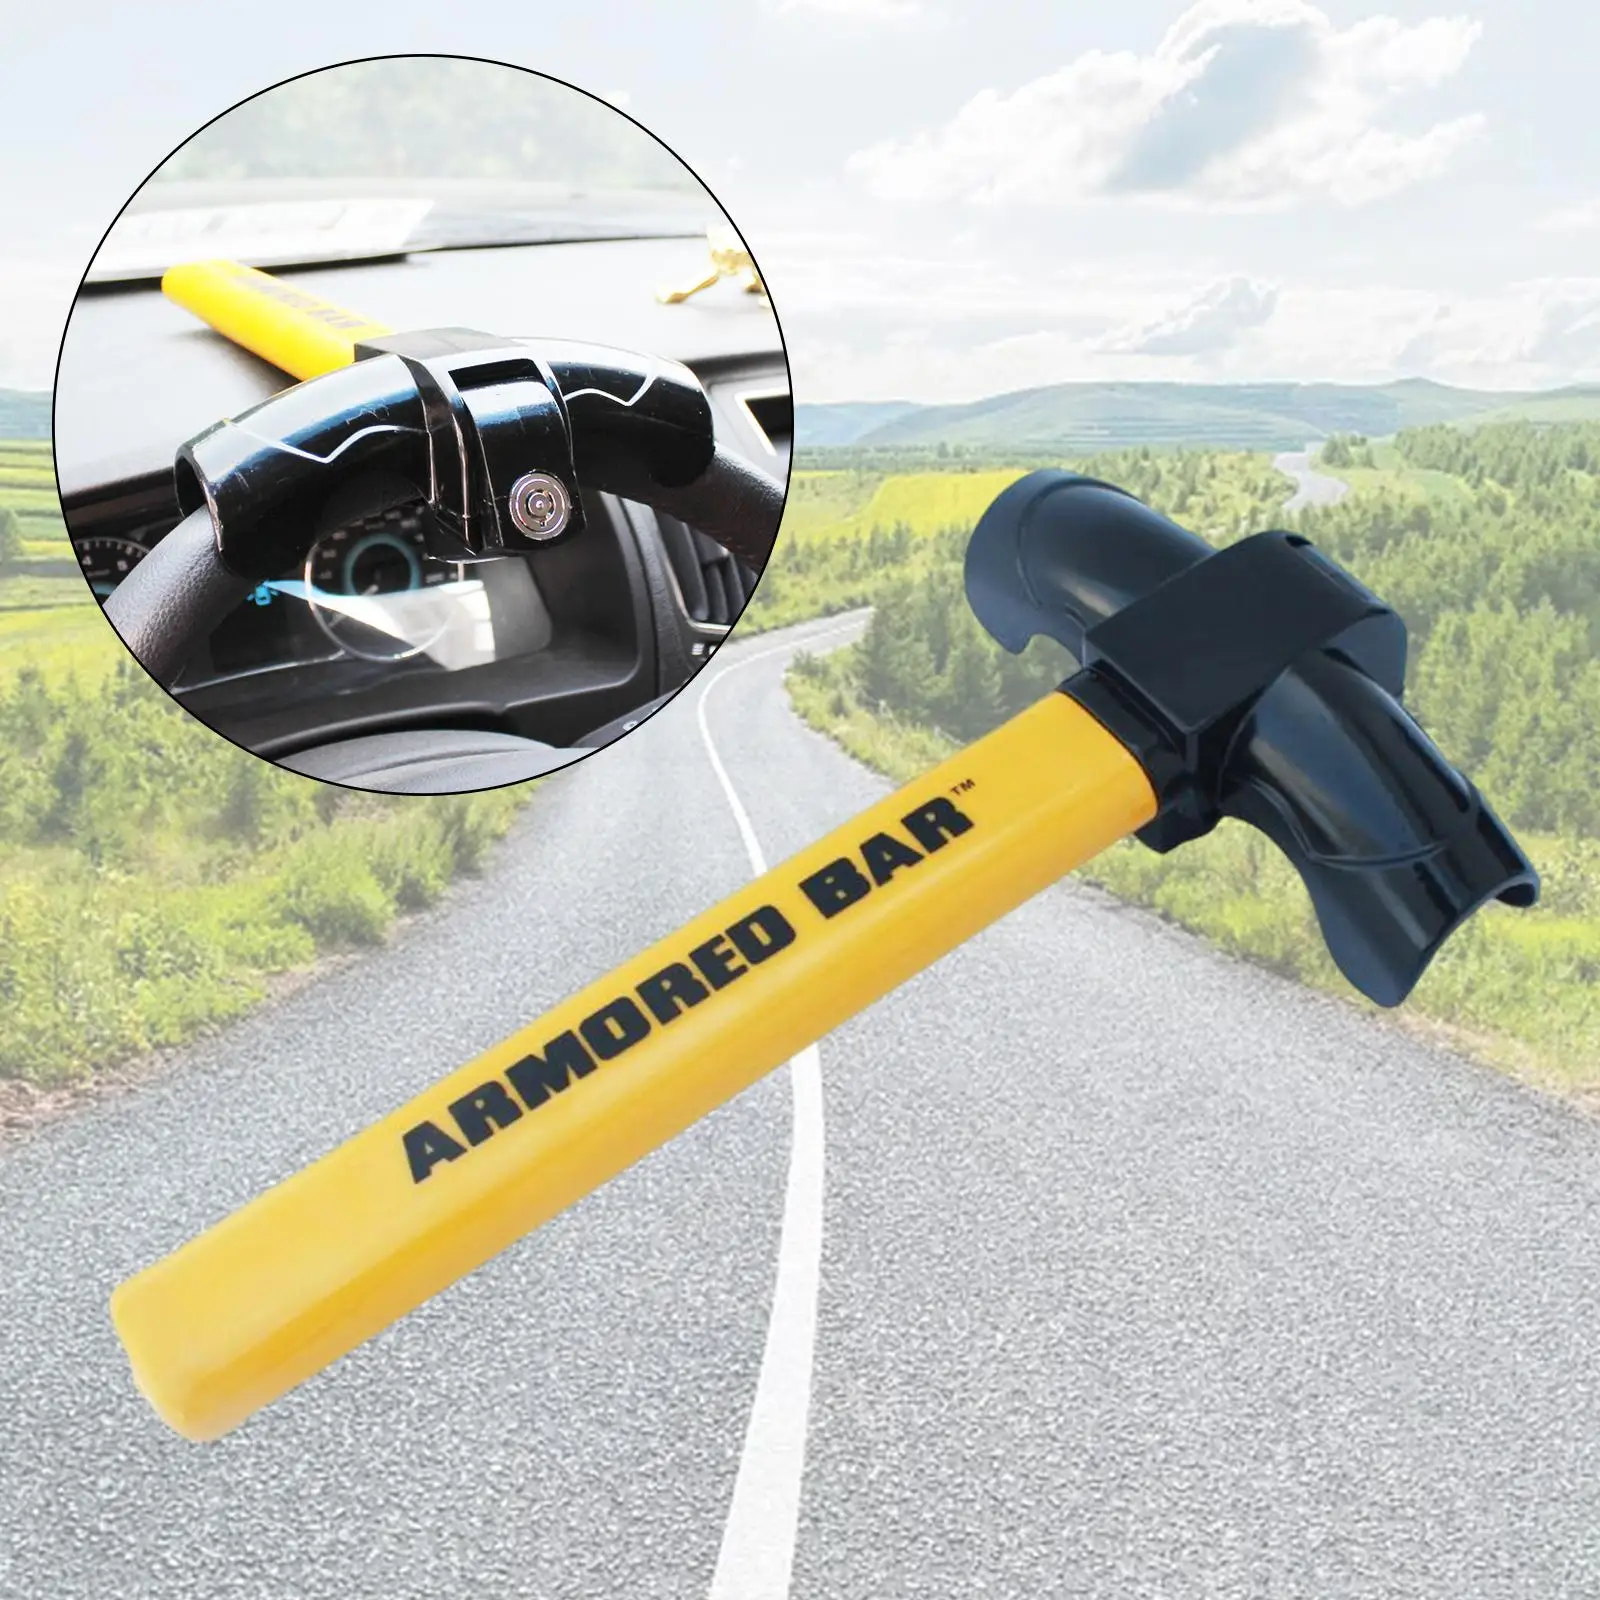 Automobile Steering Wheel Lock with 2 Keys Anti Theft Durable Convenient Universal Heavy Duty for Truck Cars Vehicles Van